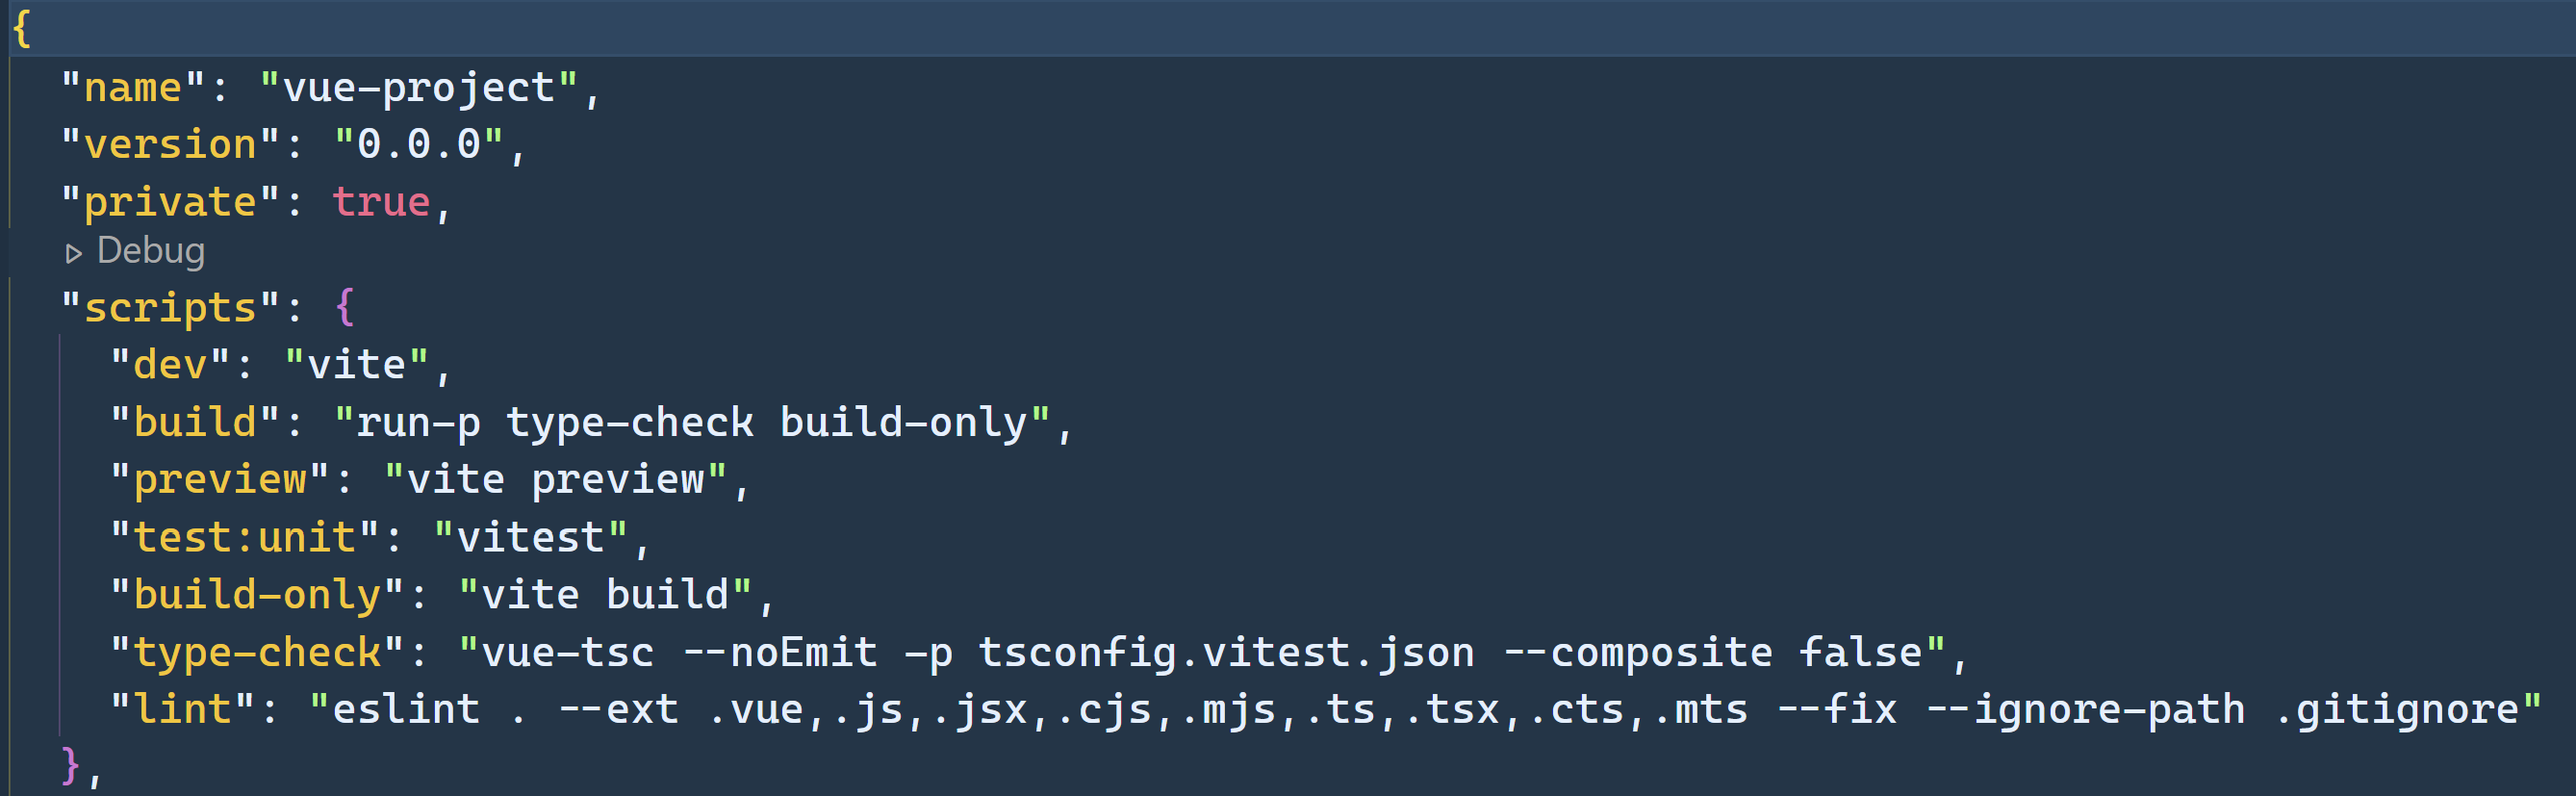 Screenshot of the npm scripts section of a package.json file.